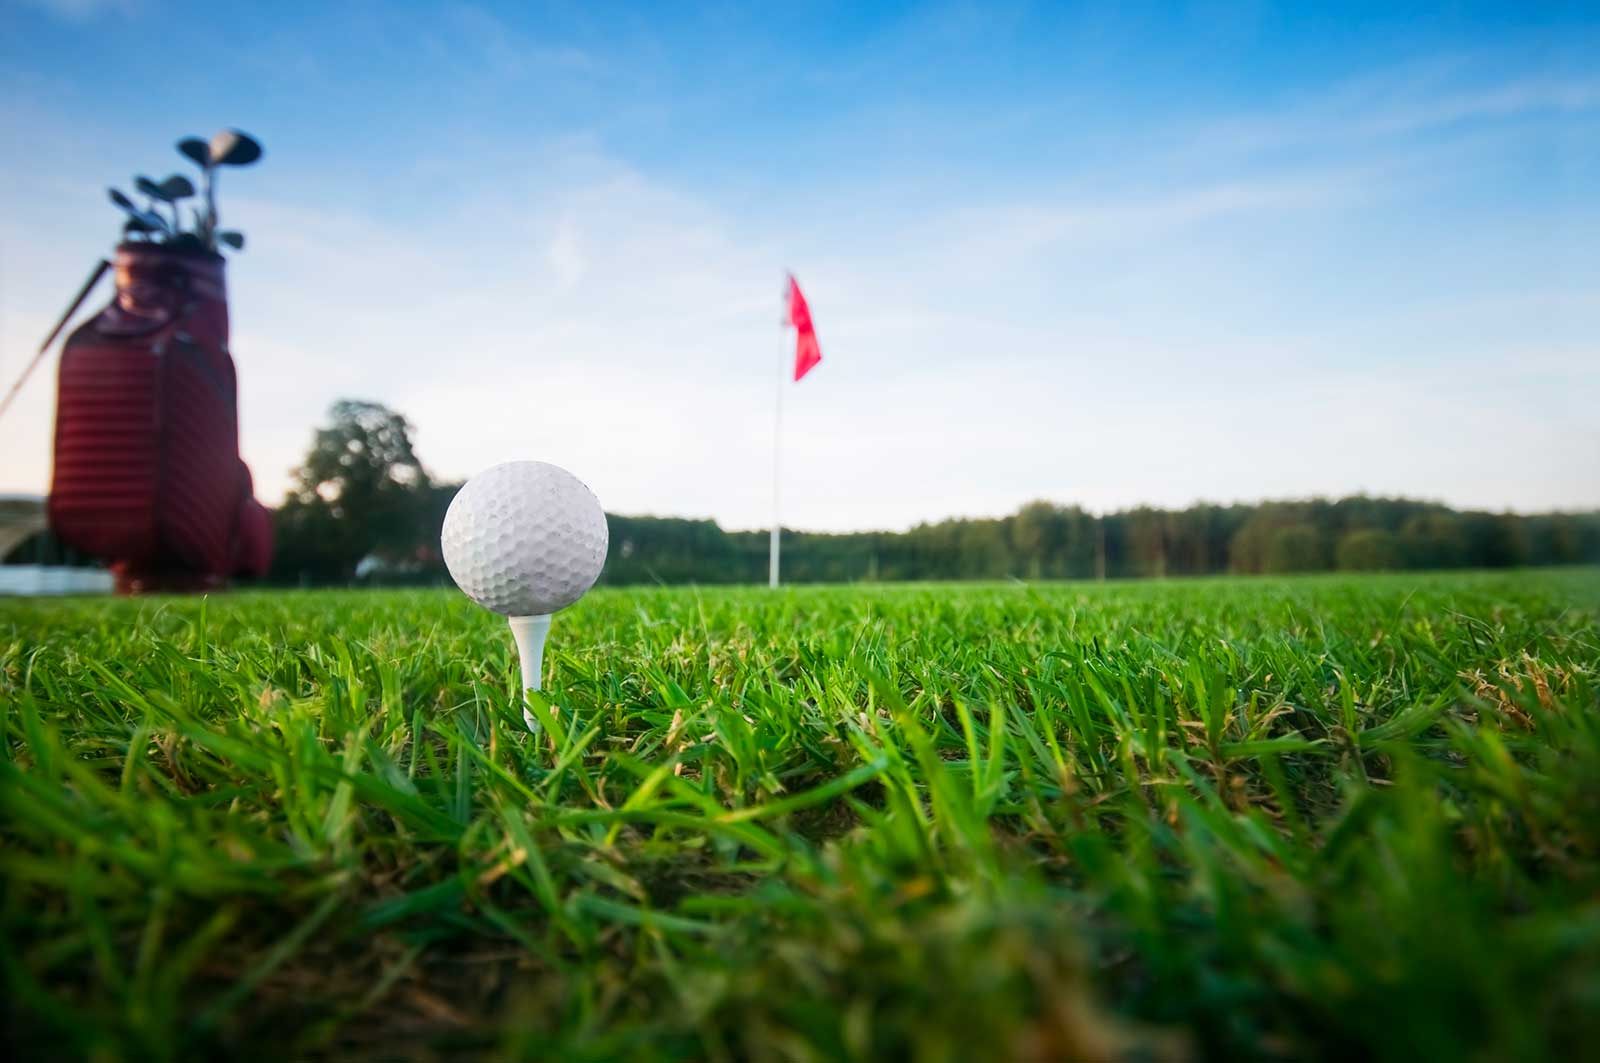 Tips for playing golf better